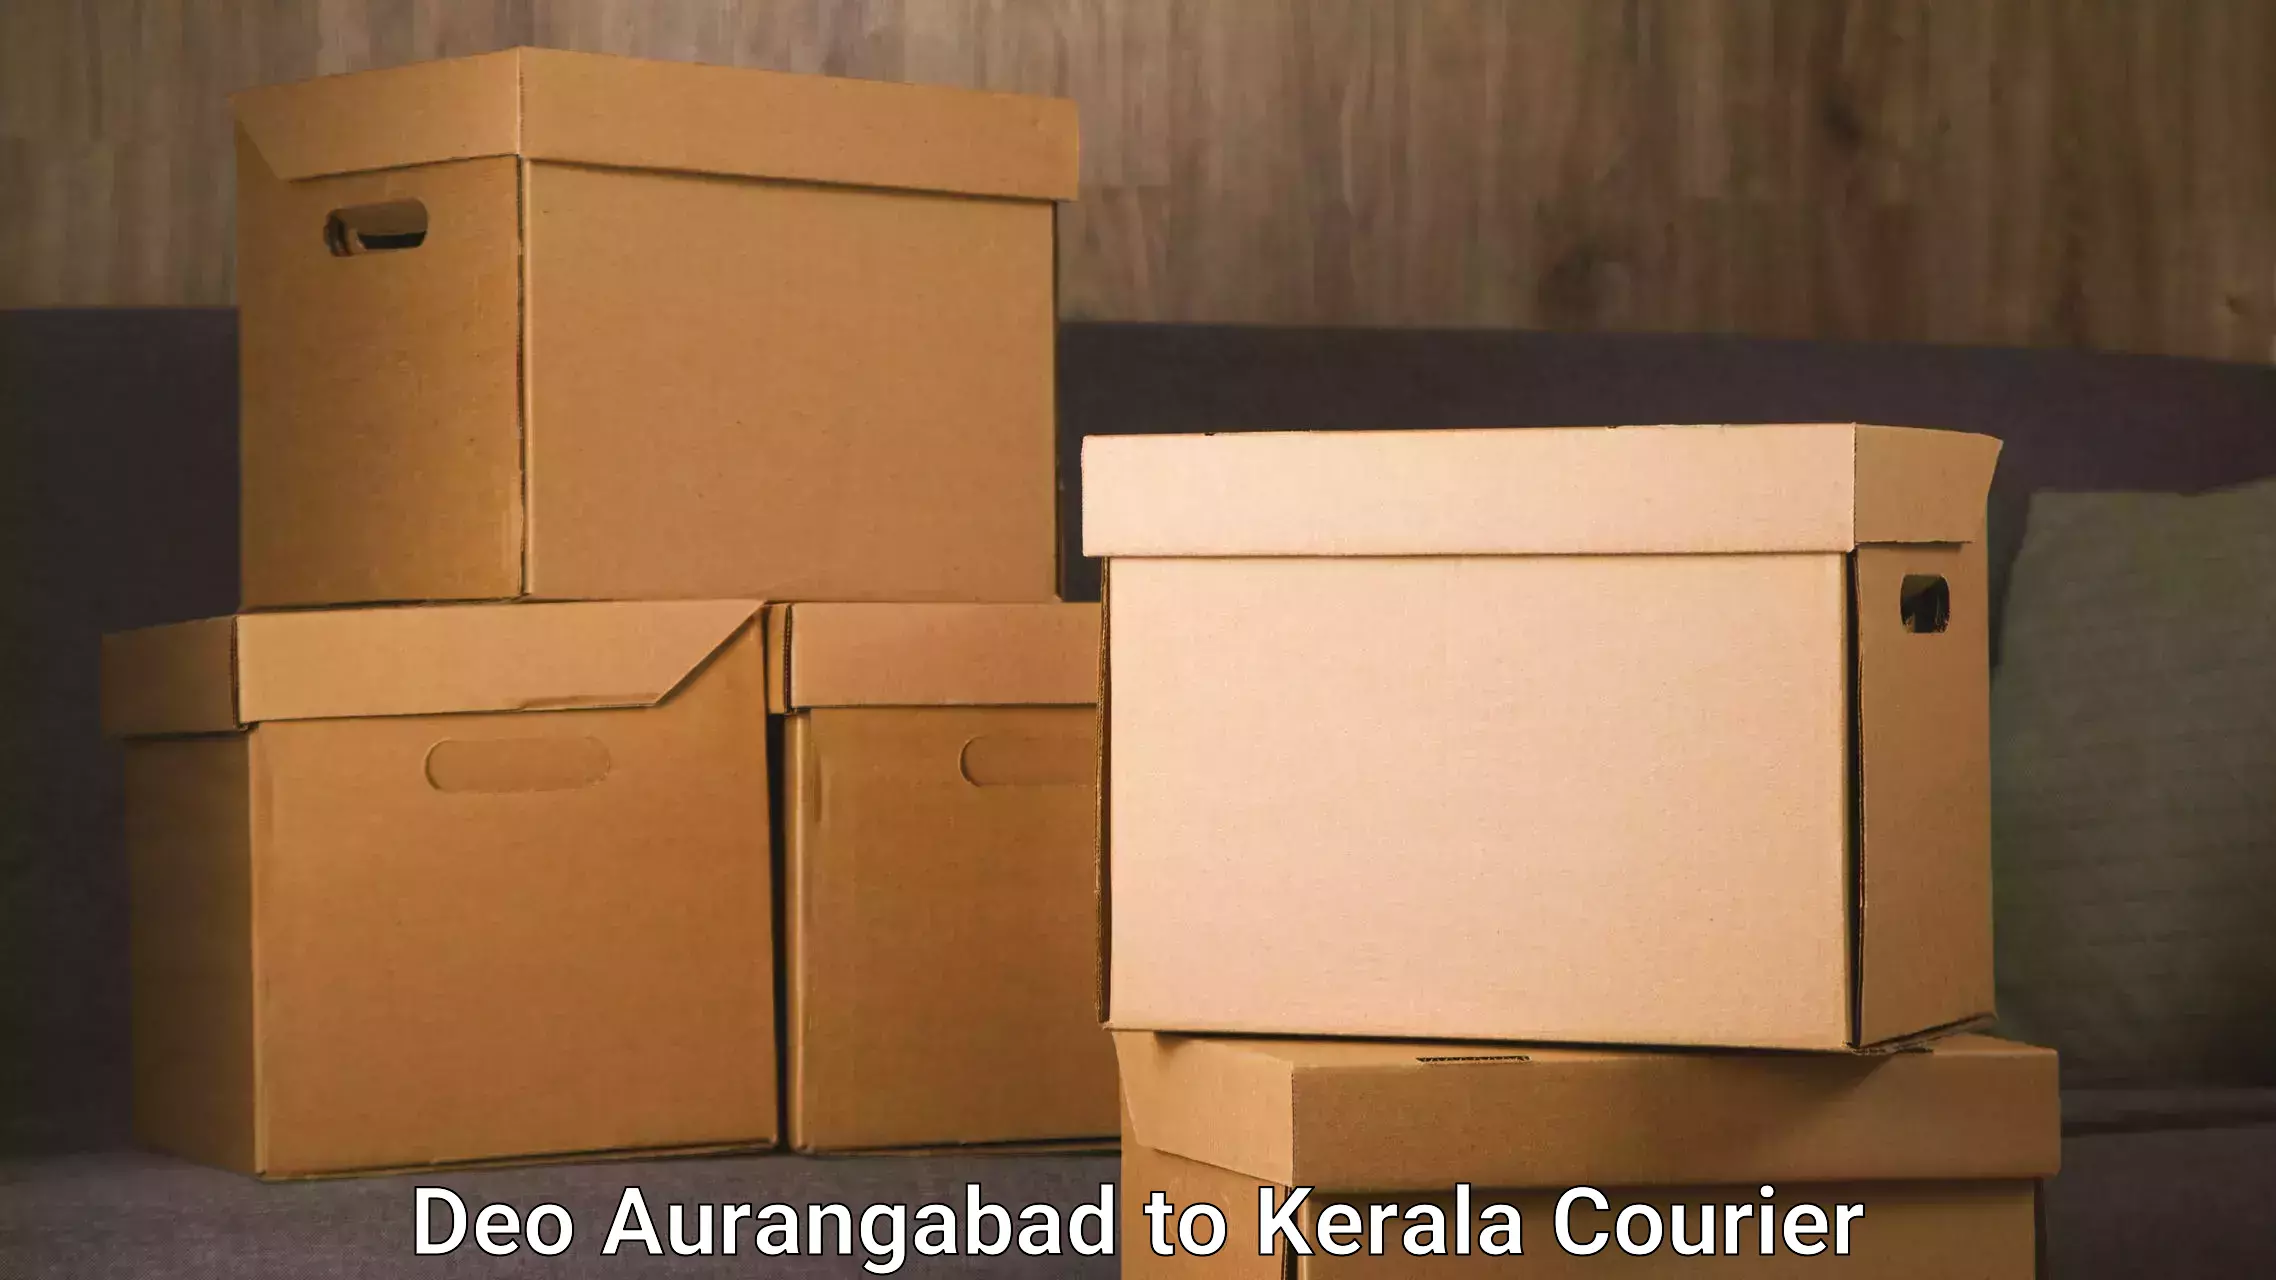 Moving and packing experts Deo Aurangabad to Koothattukulam